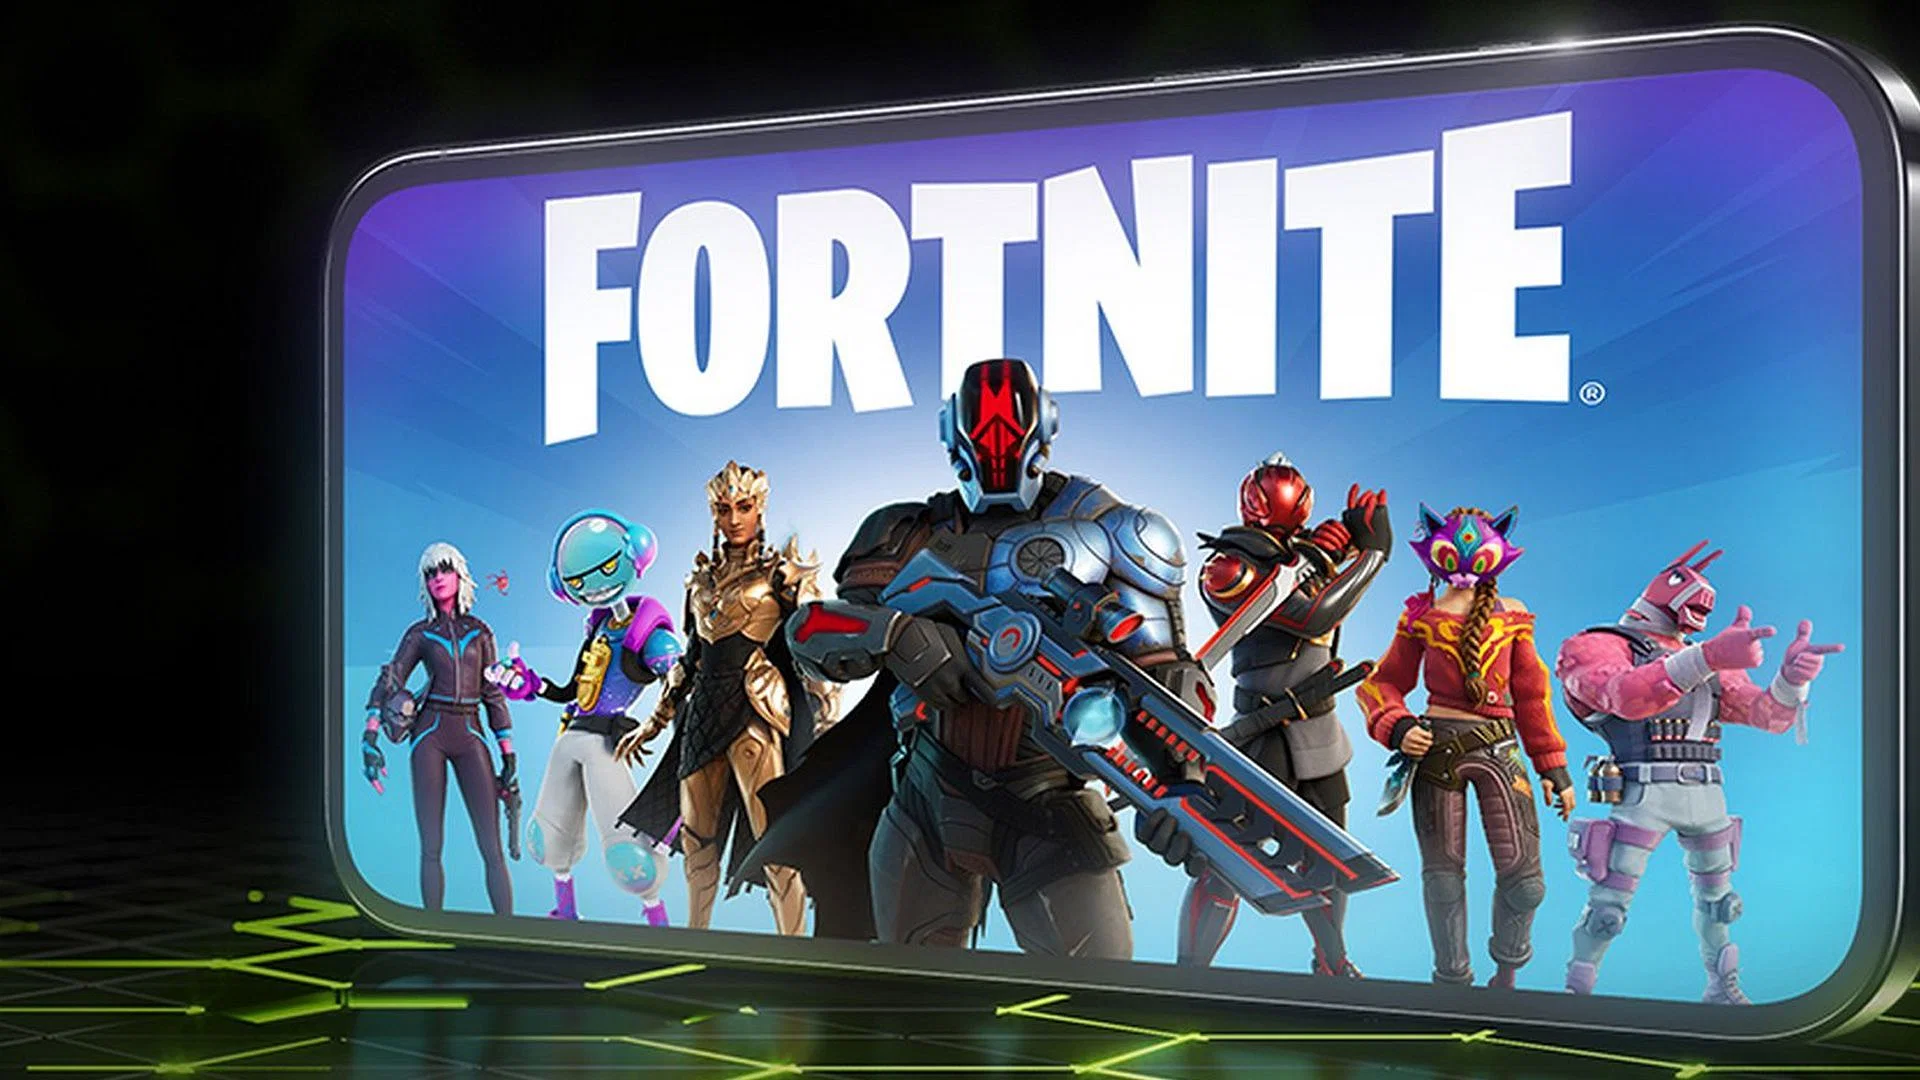 Fortnite download guide: How to get the game on every device